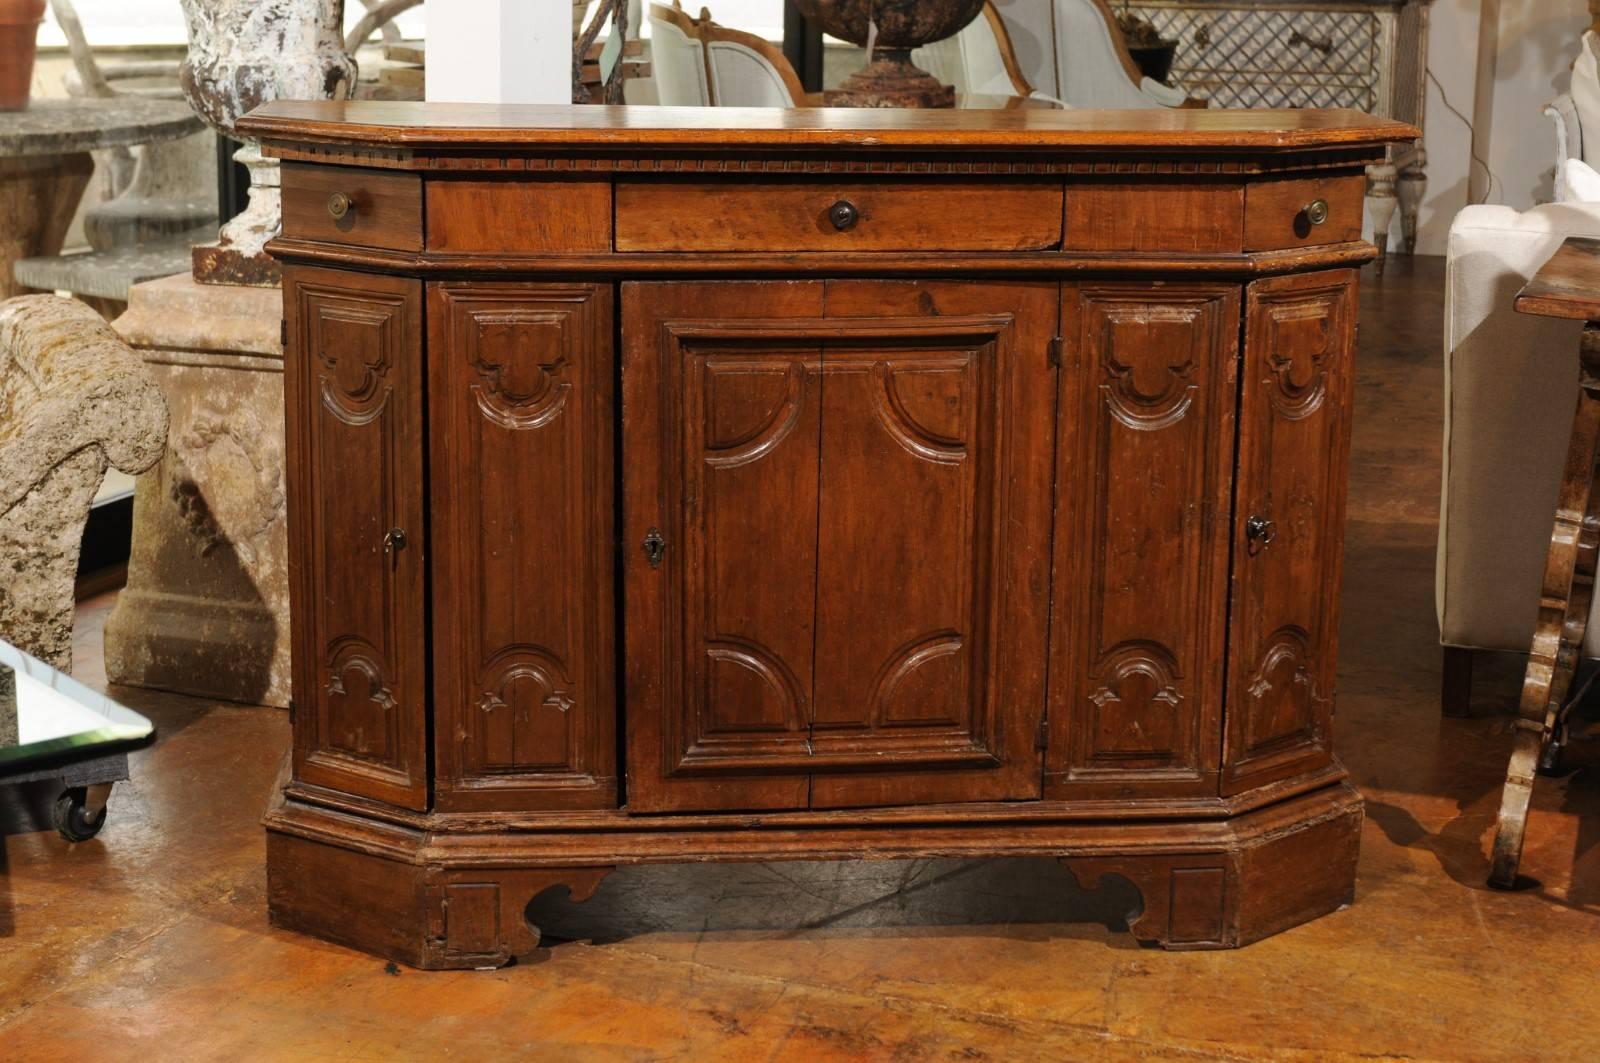 An Italian 19th century walnut narrow credenza from Siena with canted corners, geometrical motifs, three drawers and three doors. Born in Tuscany, one of the most enchanting regions of Italy, this walnut credenza features a nicely aged shaped top